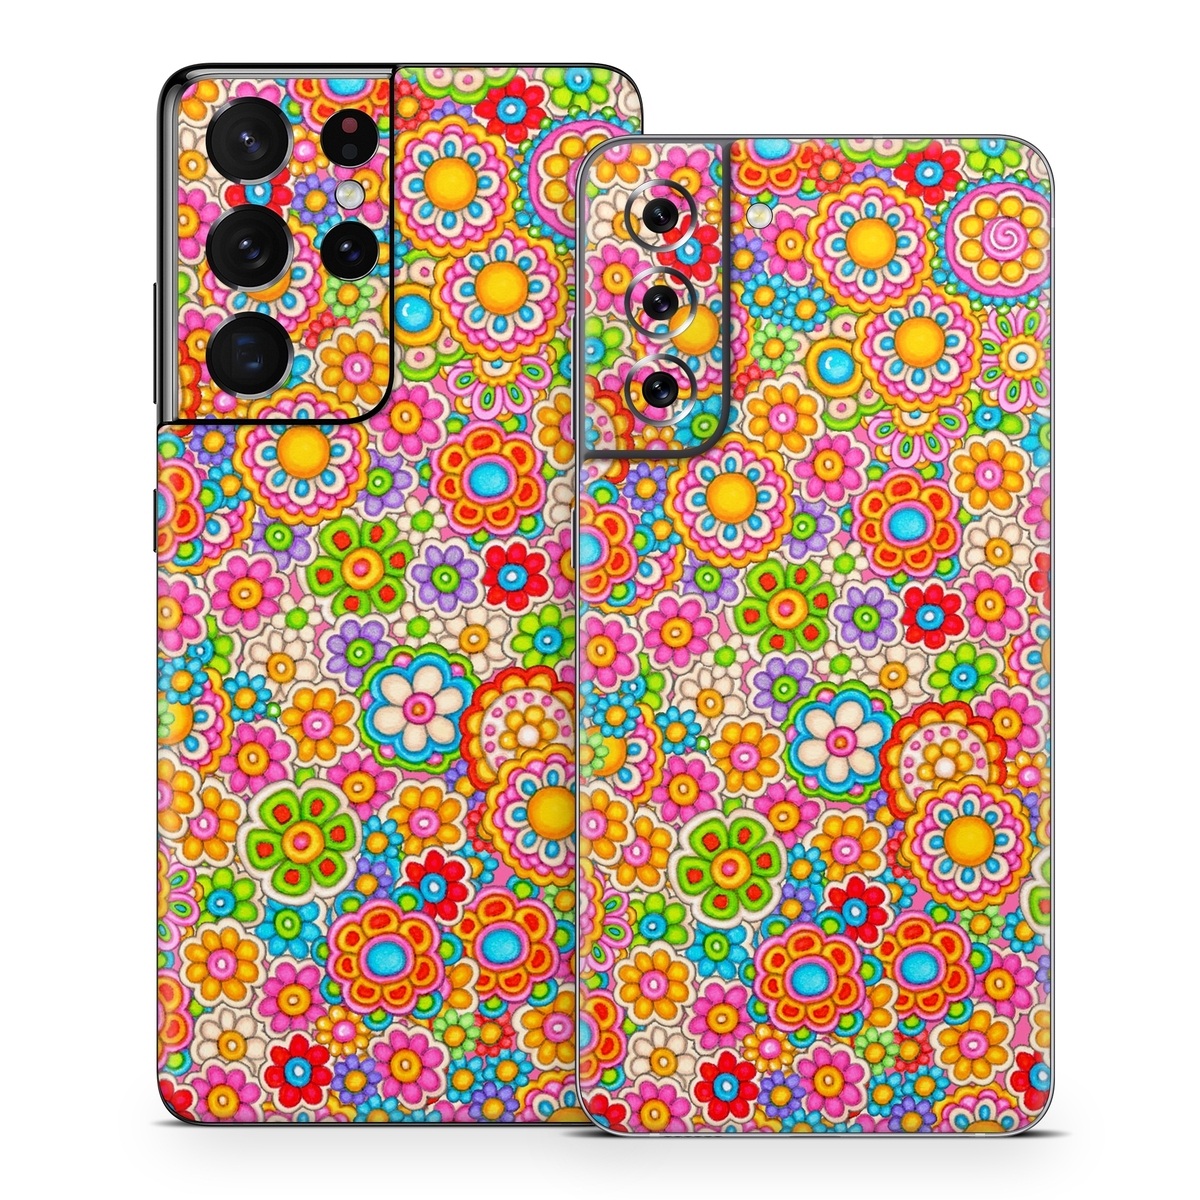 Samsung Galaxy S21 Series Skin design of Pattern, Design, Textile, Visual arts, with pink, red, orange, yellow, green, blue, purple colors